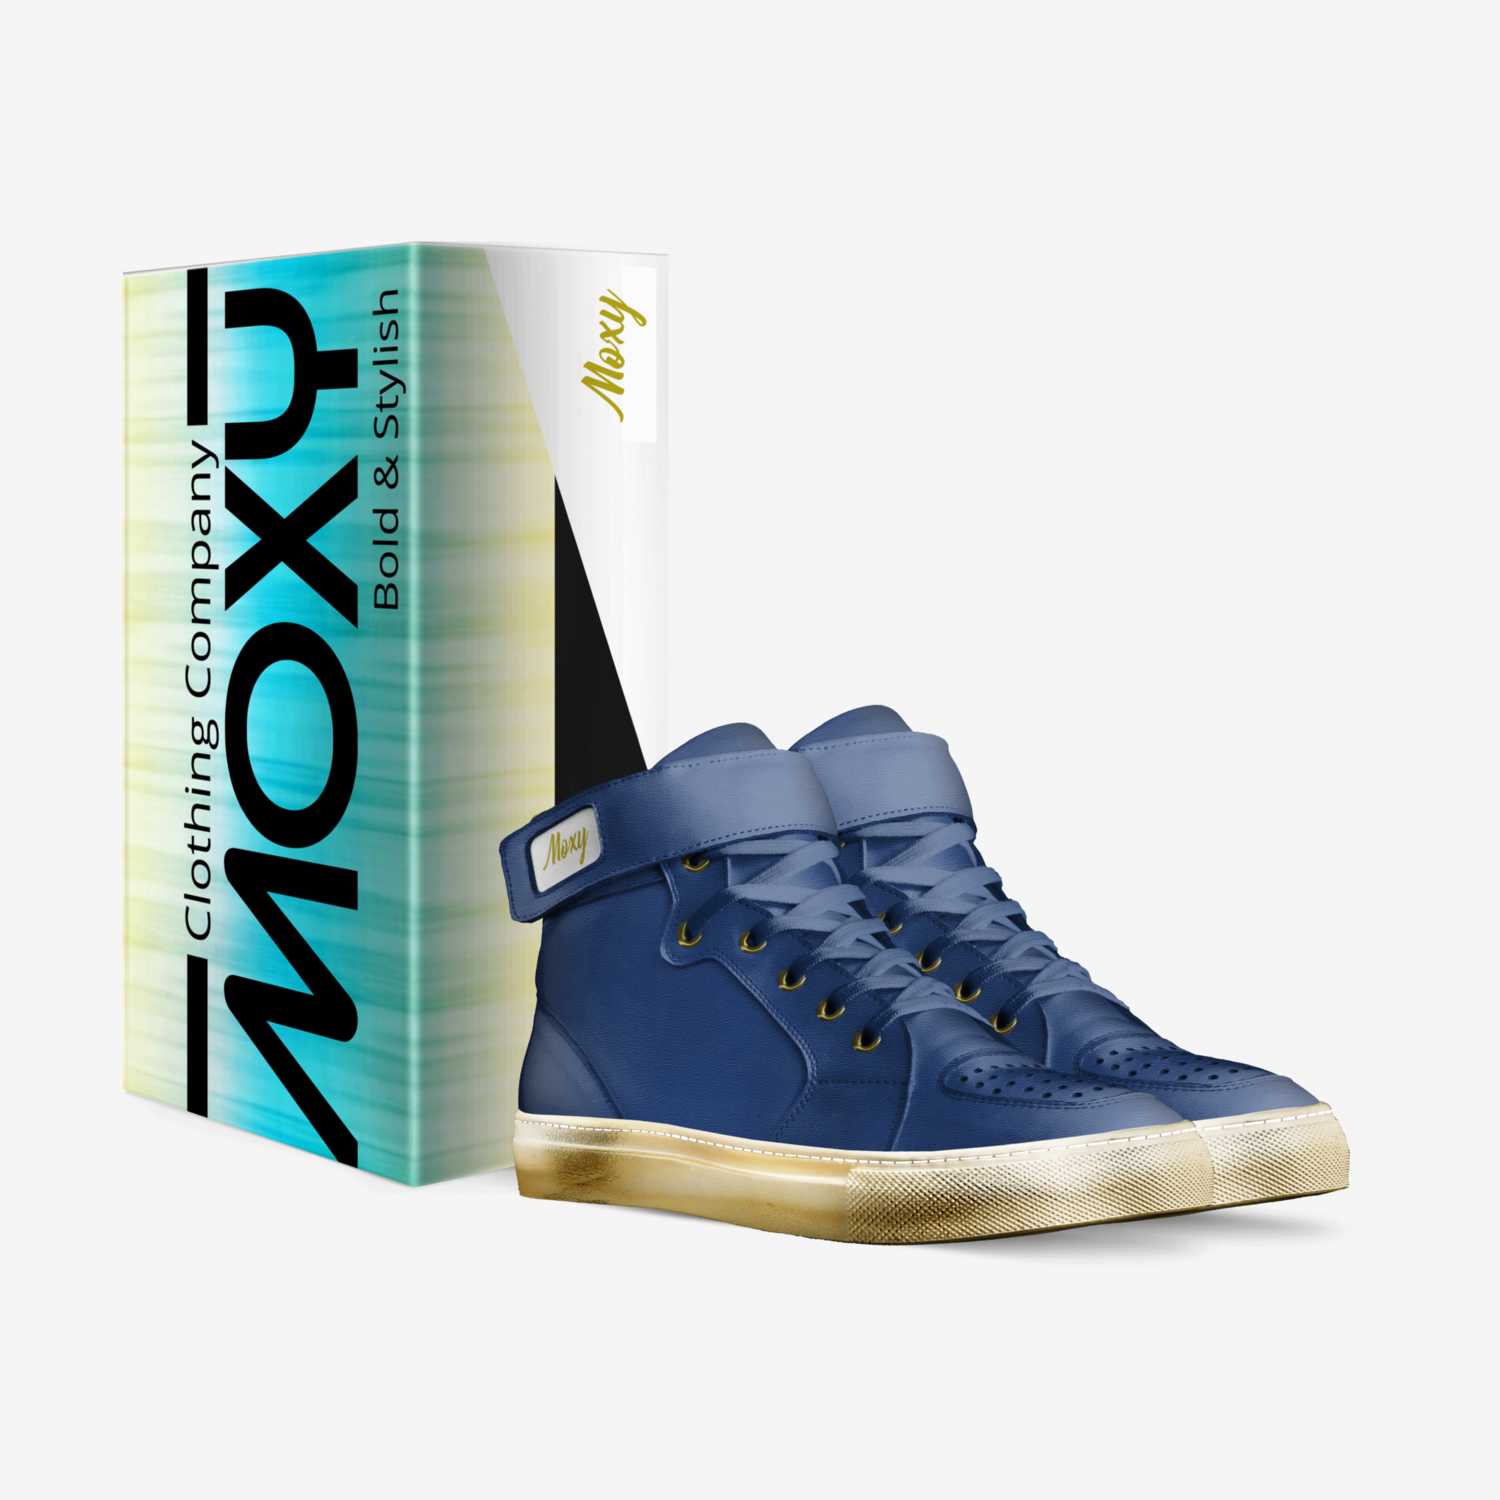 elites blue custom made in Italy shoes by Moxy Clothing Co. | Box view